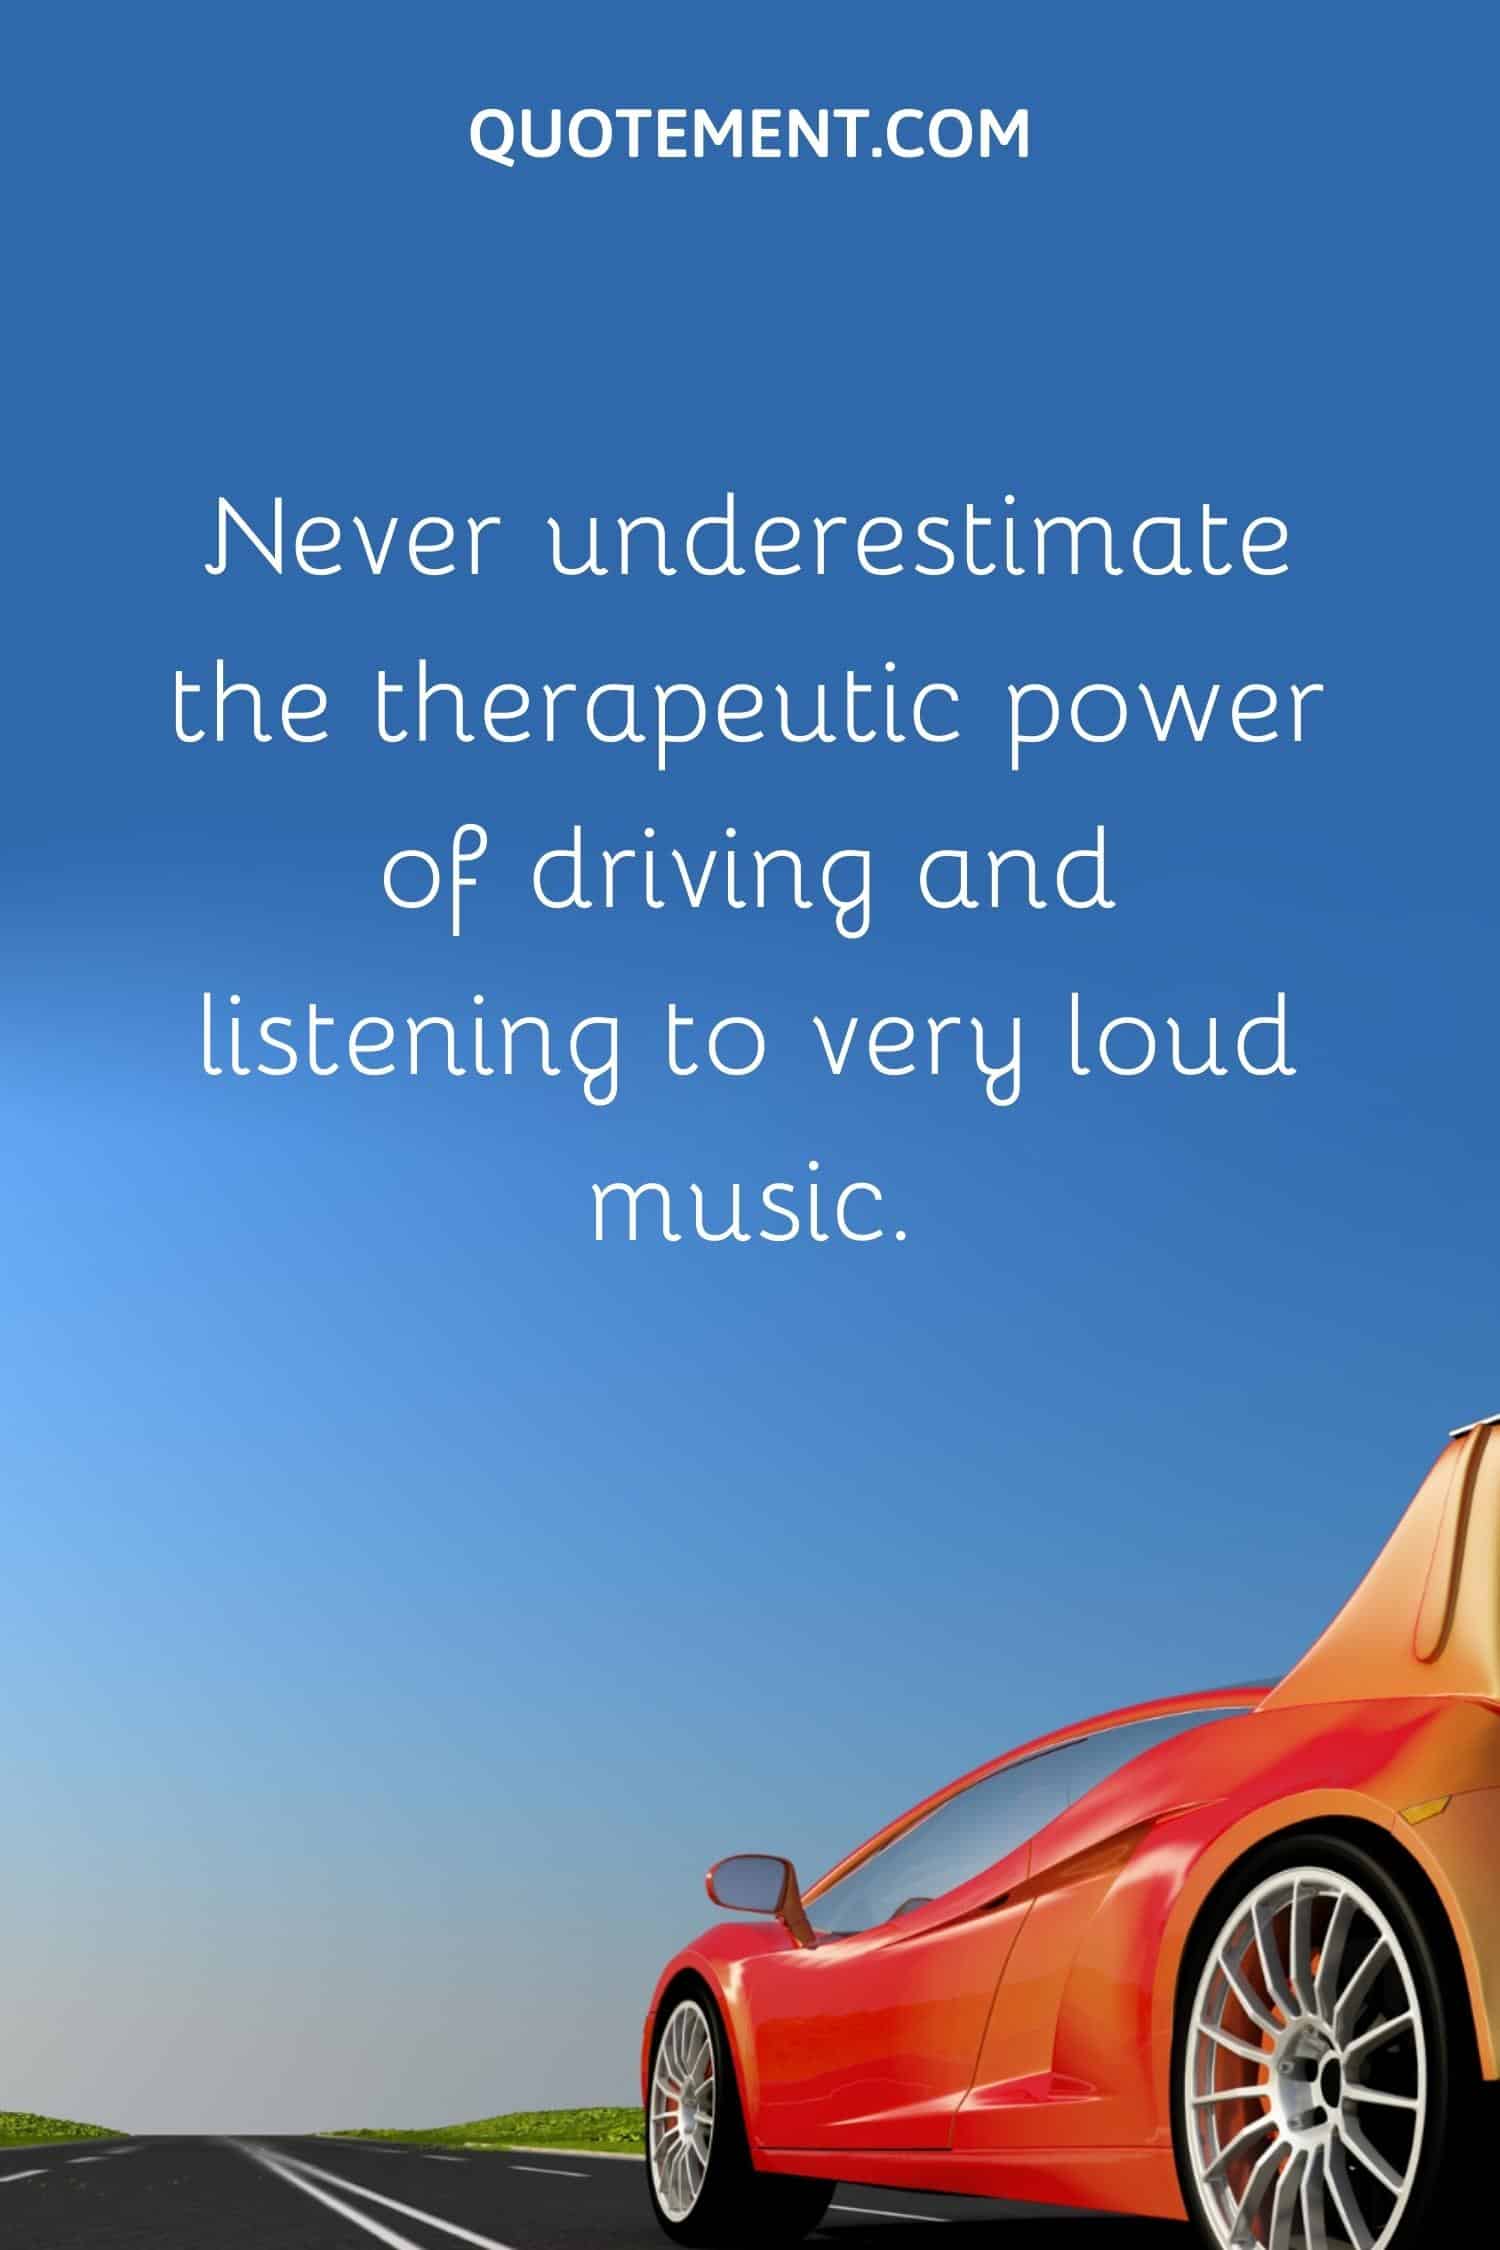 Never underestimate the therapeutic power of driving and listening to very loud music